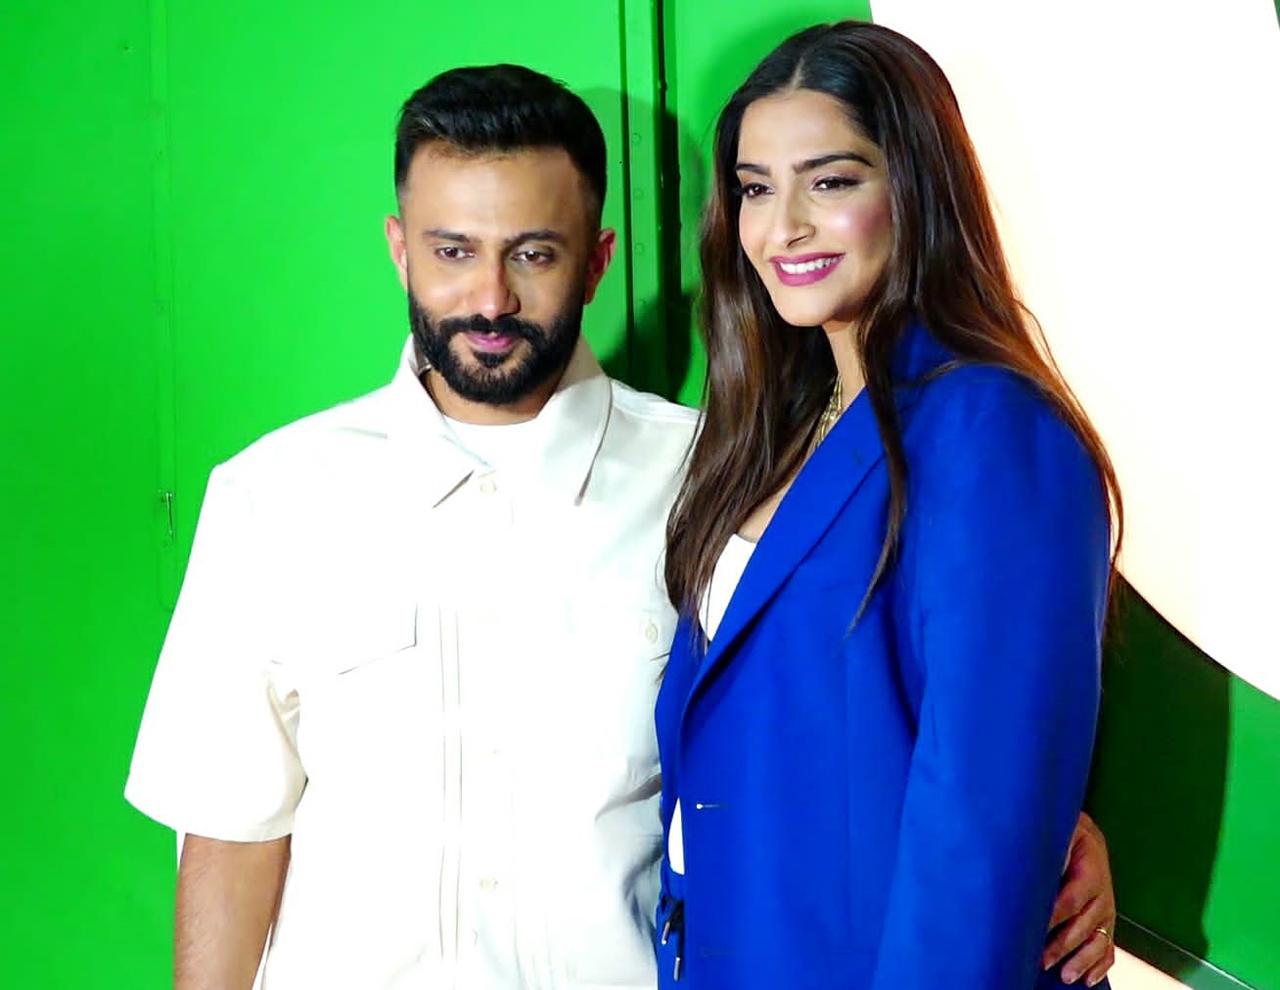 Soon after Sonam Kapoor announced her pregnancy, the actress and her husband Anand Ahuja's store launch in Mumbai. The fashion icon opted for a comfy yet classy blue pantsuit for the day, paired with white sneakers.